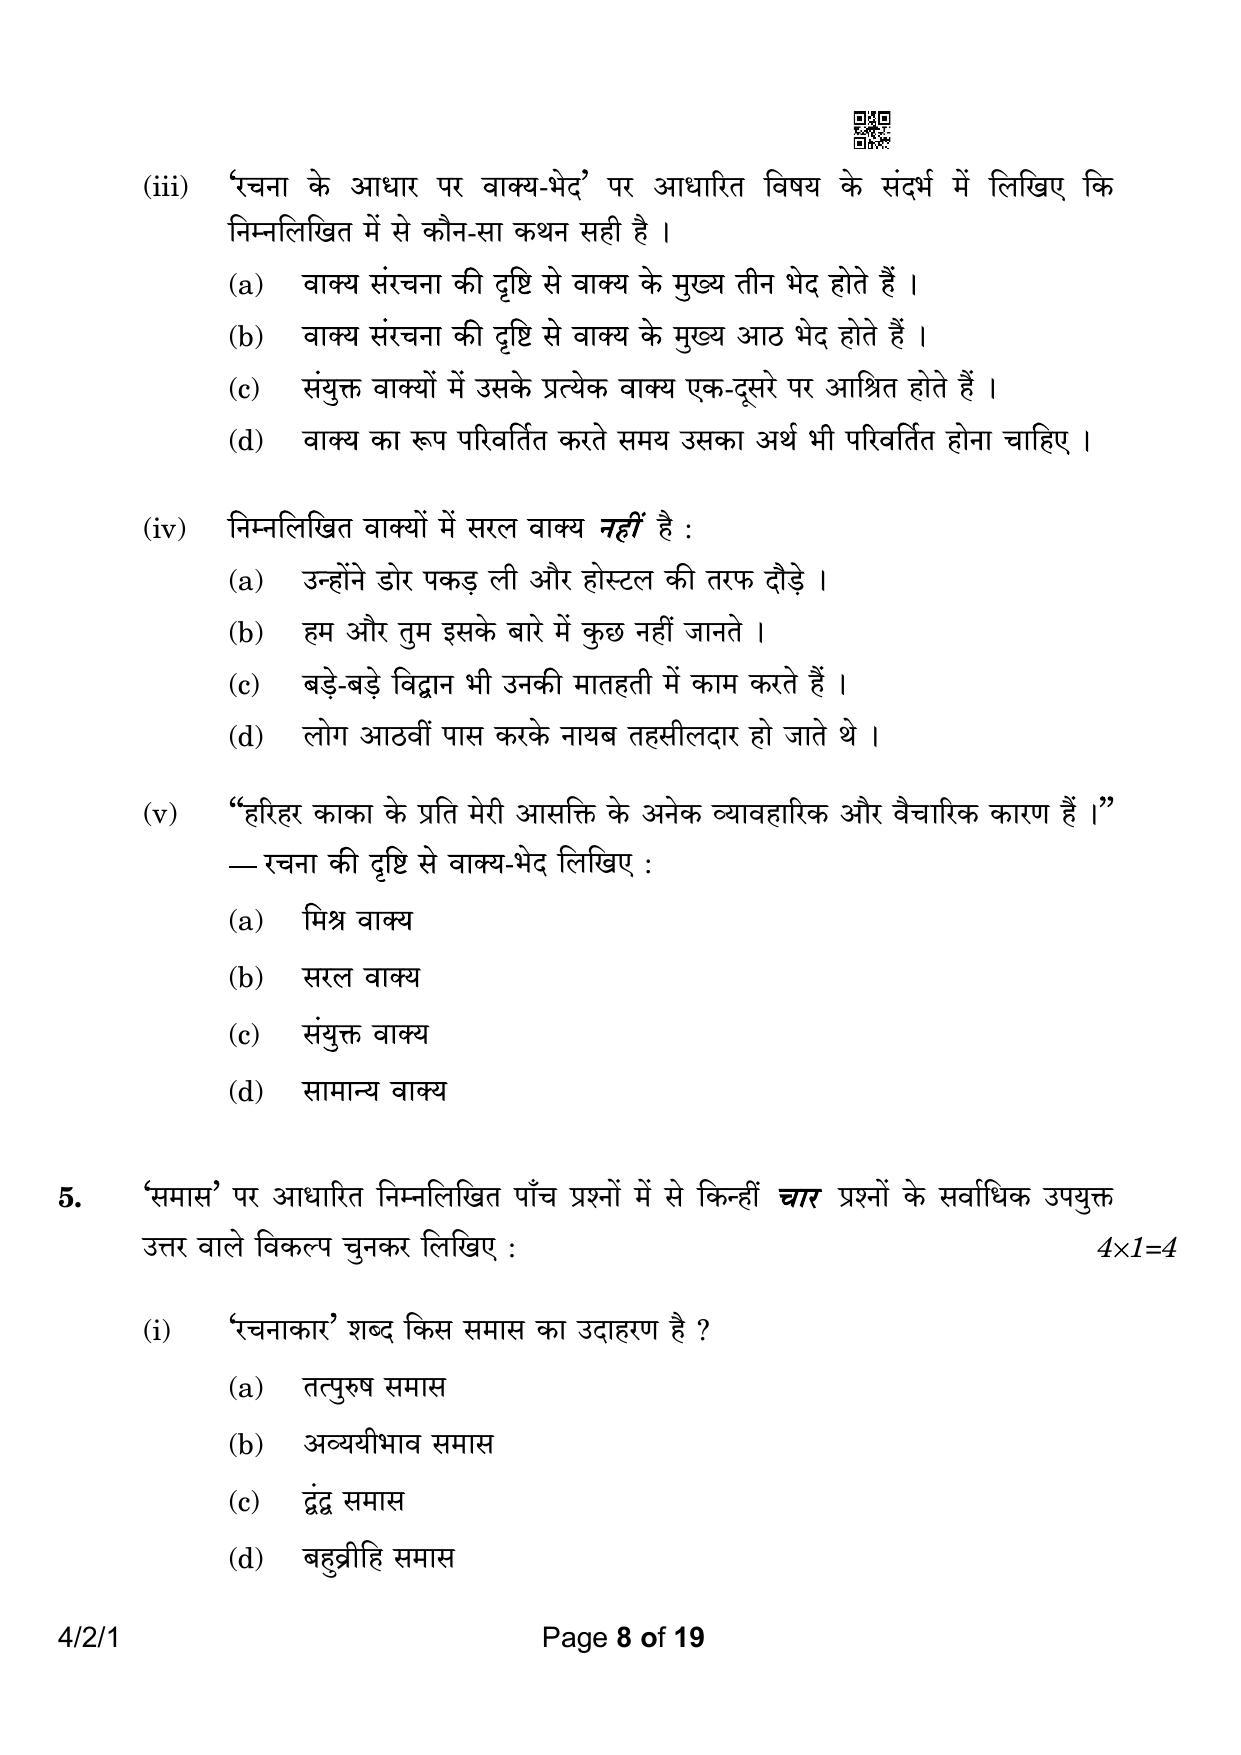 CBSE Class 10 4-2-1 Hindi B 2023 Question Paper - Page 8